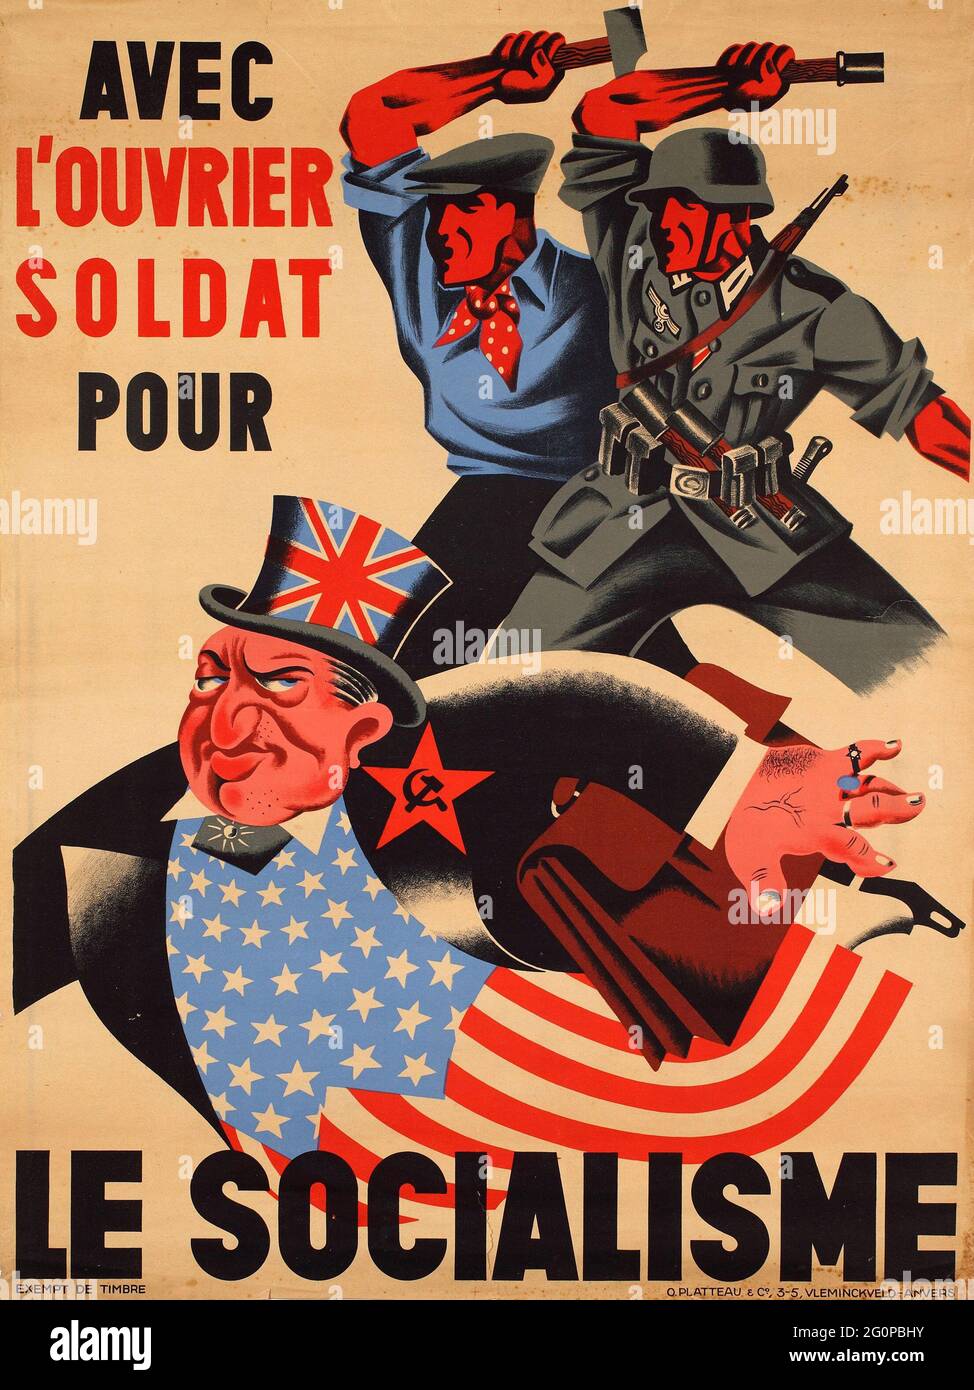 A vintage Nazi propaganda poster from Belgium showing a peasant and soldier fighting together and a fat UK/US businessman fleeing Stock Photo